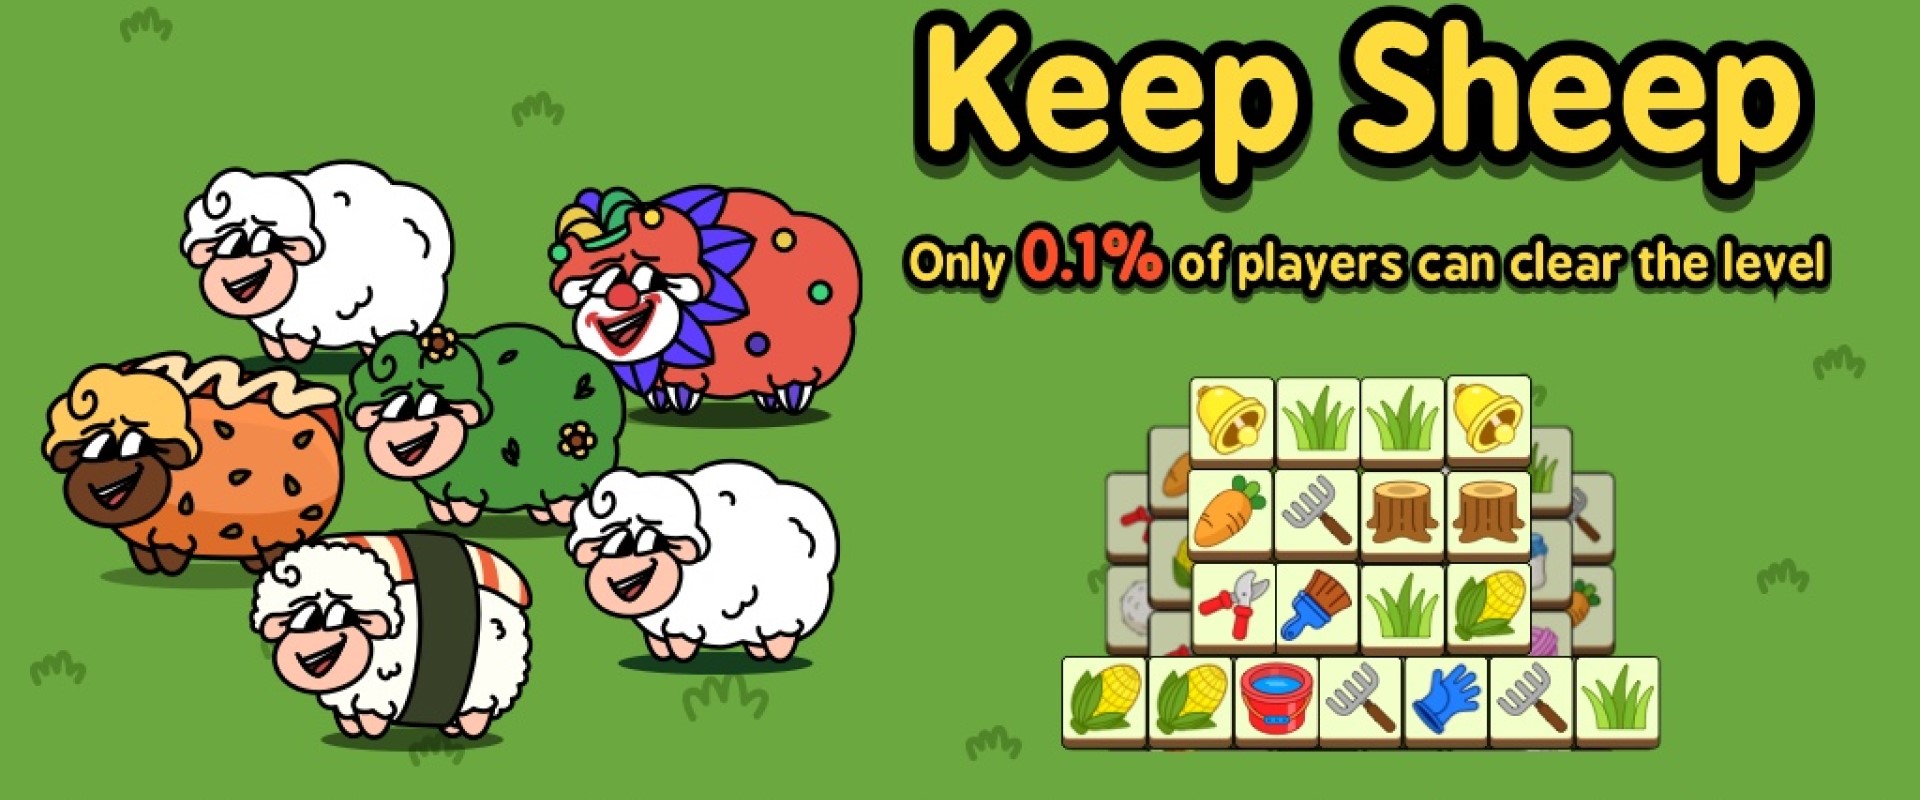 Download and Play Sheep N Sheep Match 3 Games on PC with NoxPlayer